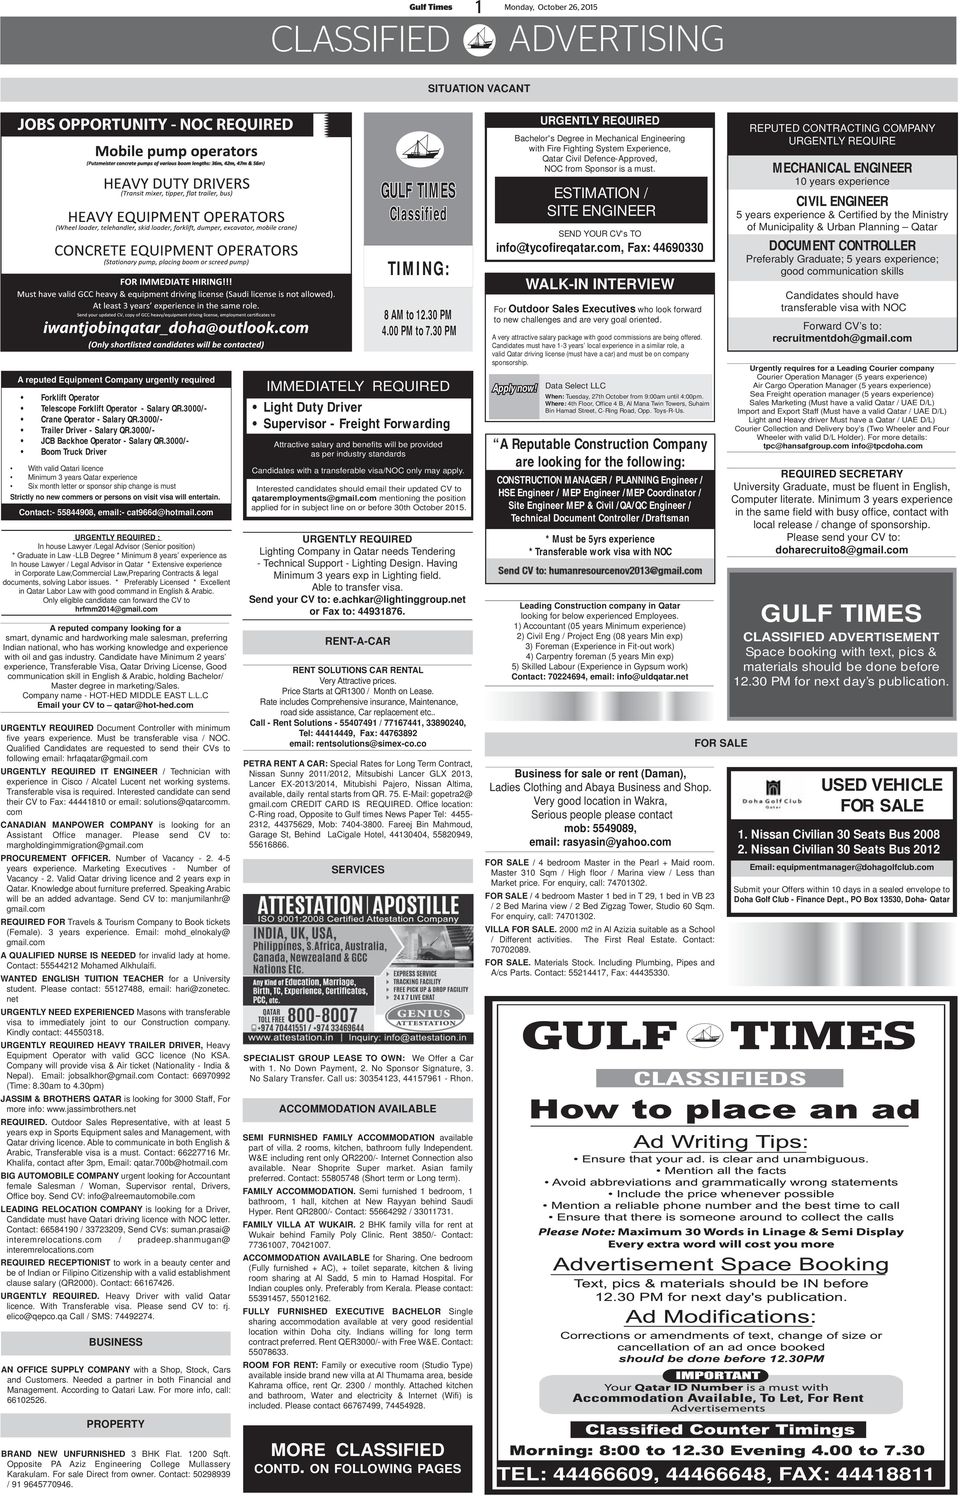 Classified Gulf Times 1 Monday October 26 2015 Advertising Tel Fax Used Vehicle For Sale Pdf Free Download